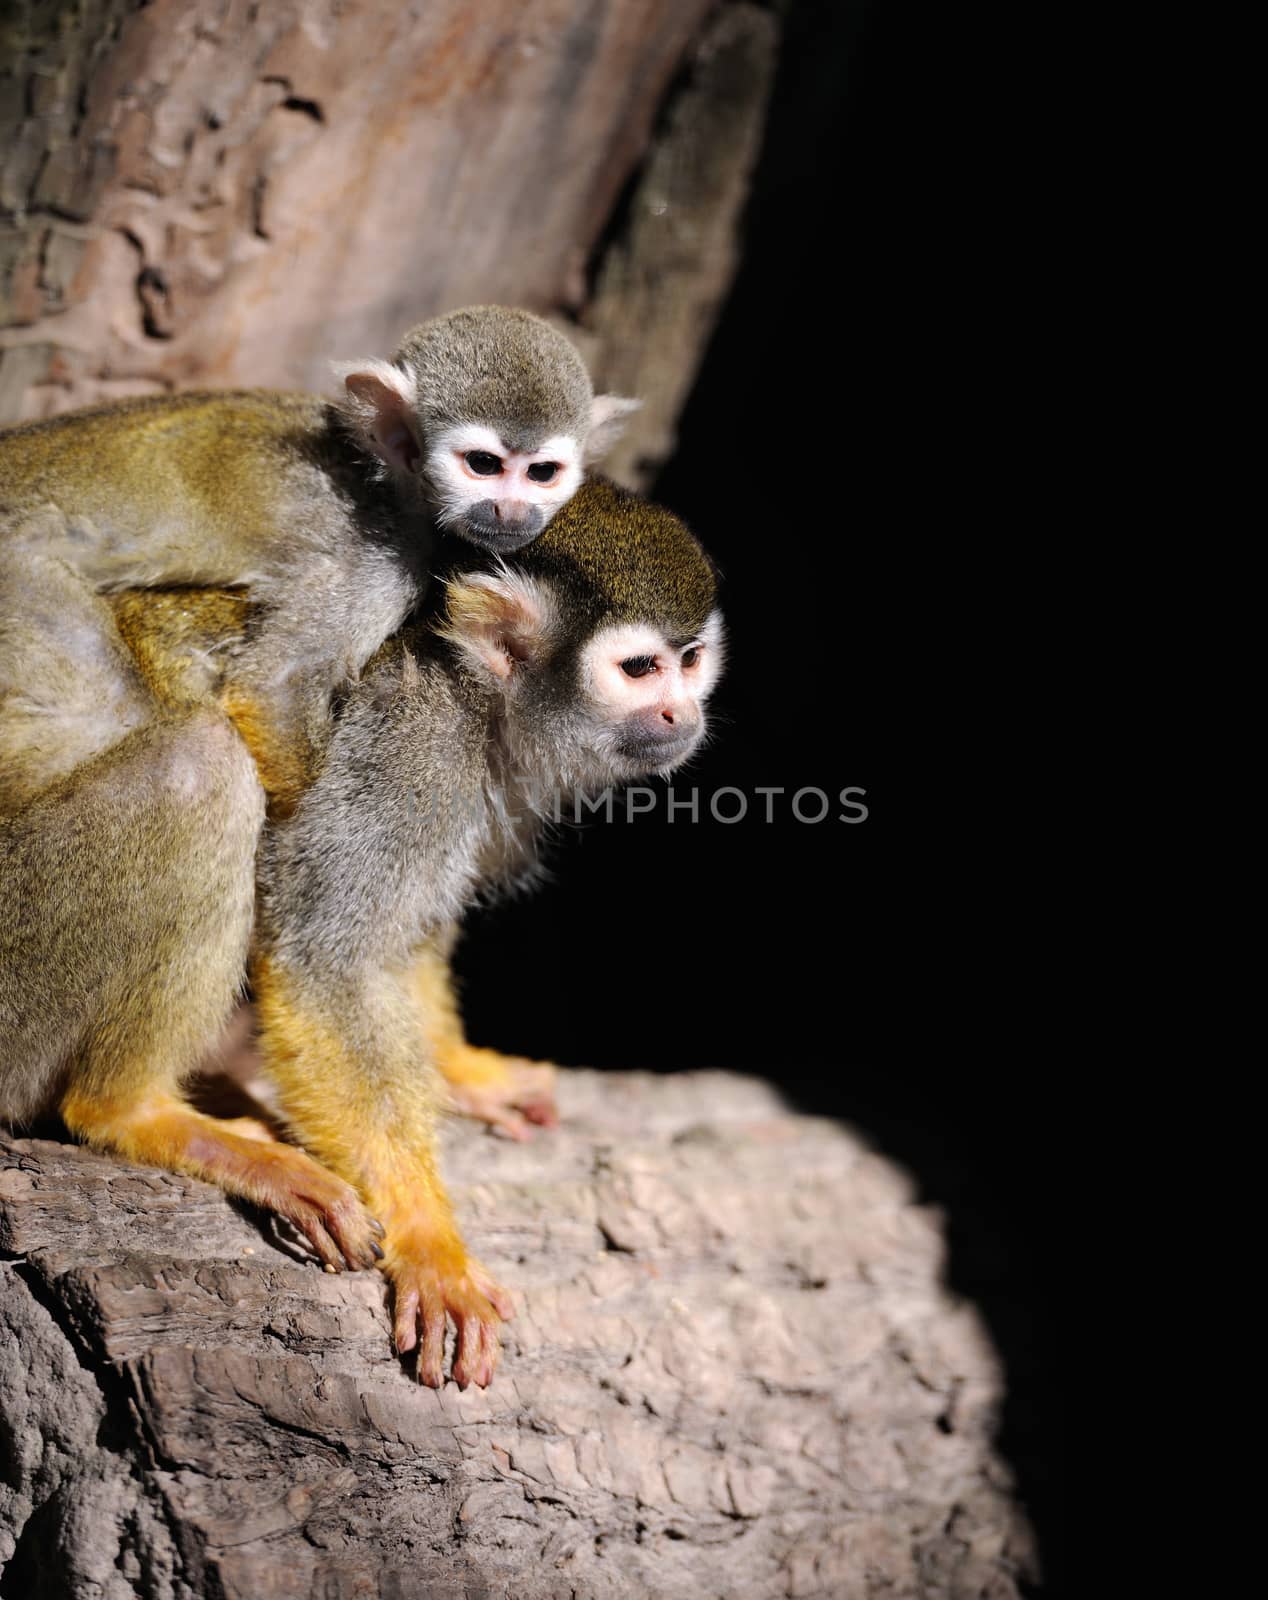 Close-up of a Common Squirrel Monkey on branch